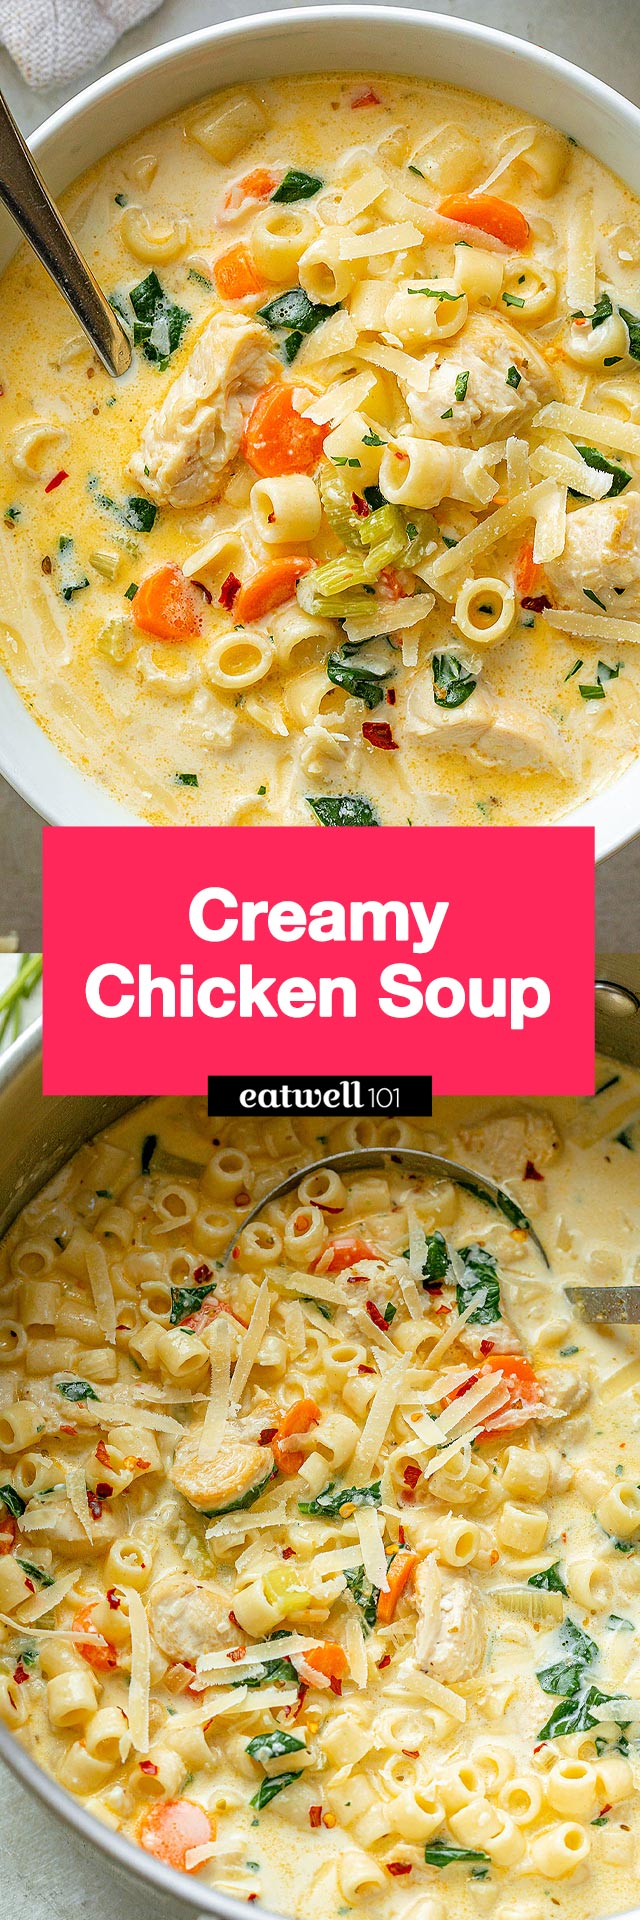 Creamy Chicken Pasta Soup Recipe - #chicken #pasta #soup #recipe - Nutritious, easy and big on flavor, this delicious chicken pasta soup tastes like you spent all day in the kitchen, but it's done in less than 30 minutes!